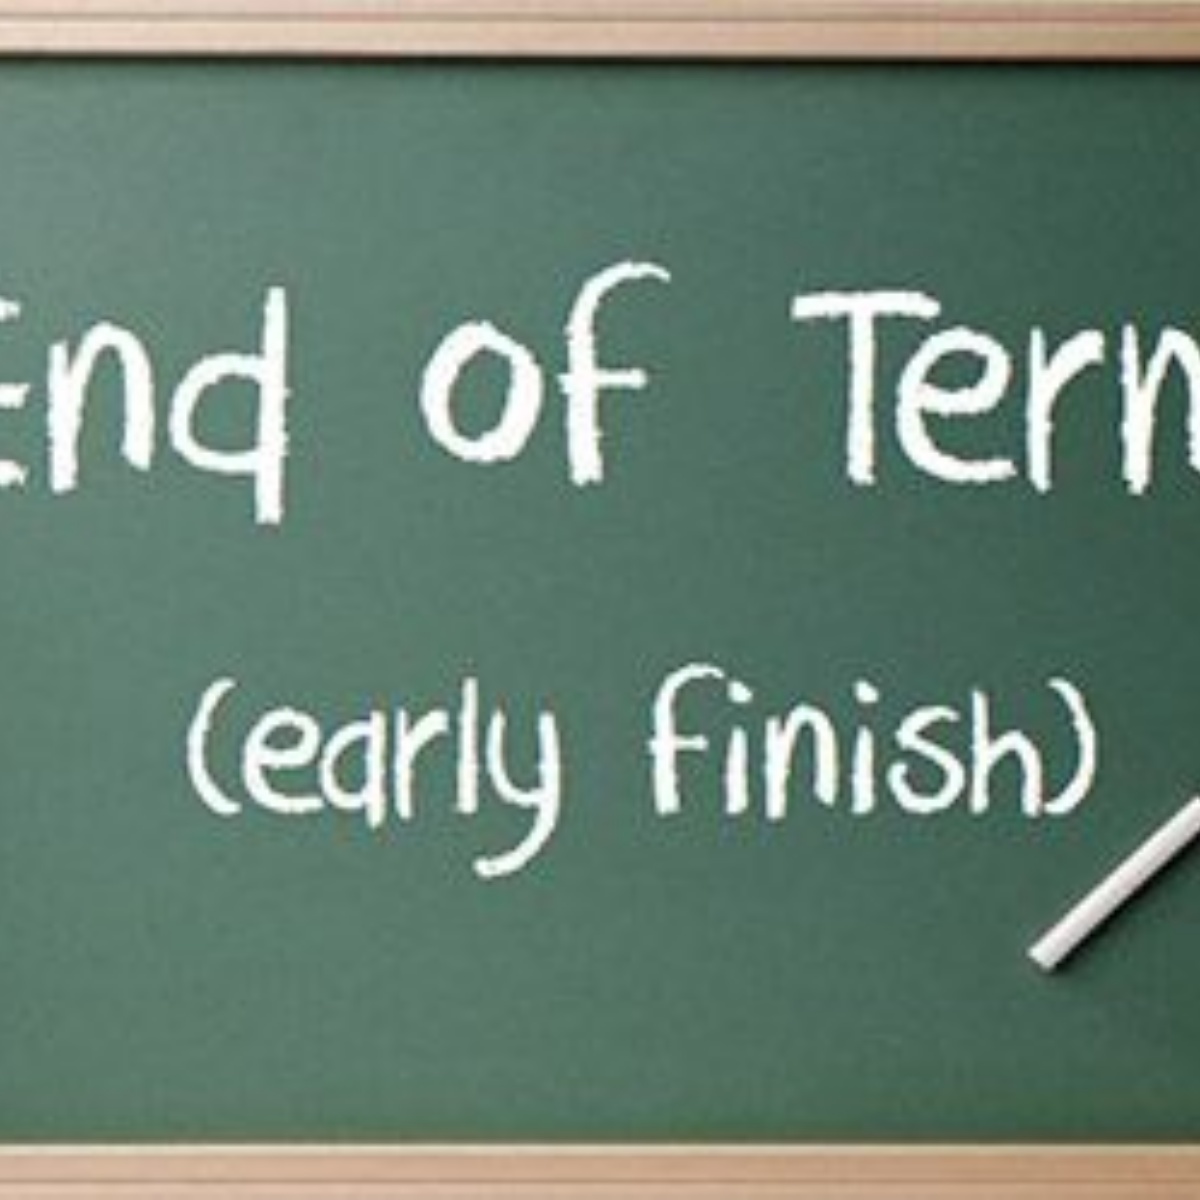 Support terms. End of term. Term. School term. End of School term.